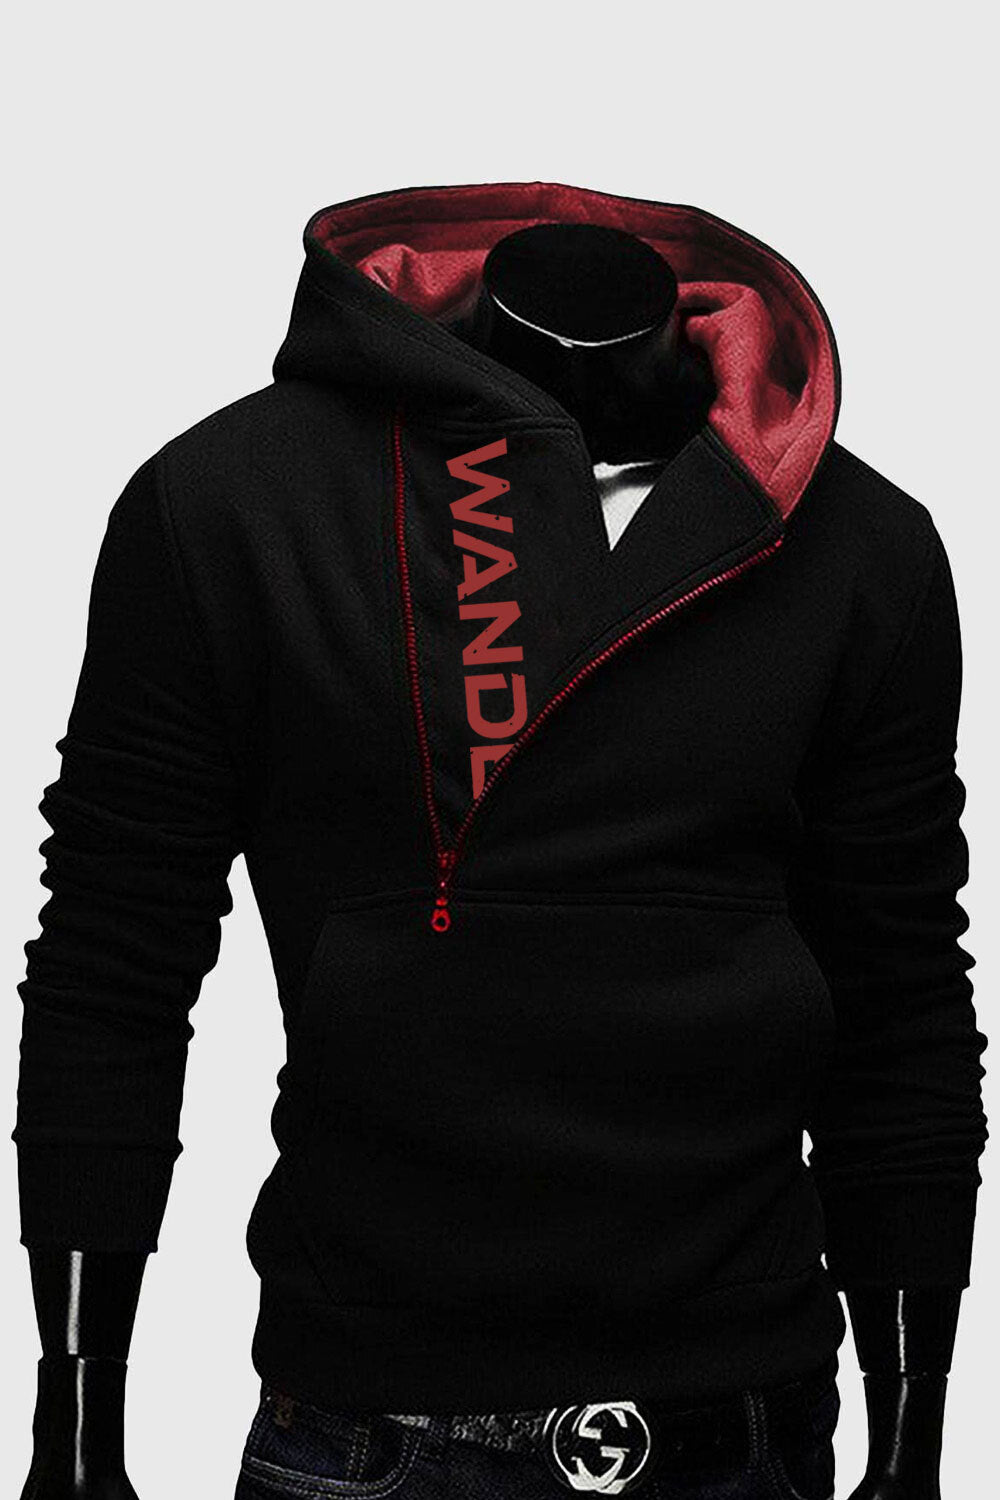 Wander - Limited Edition